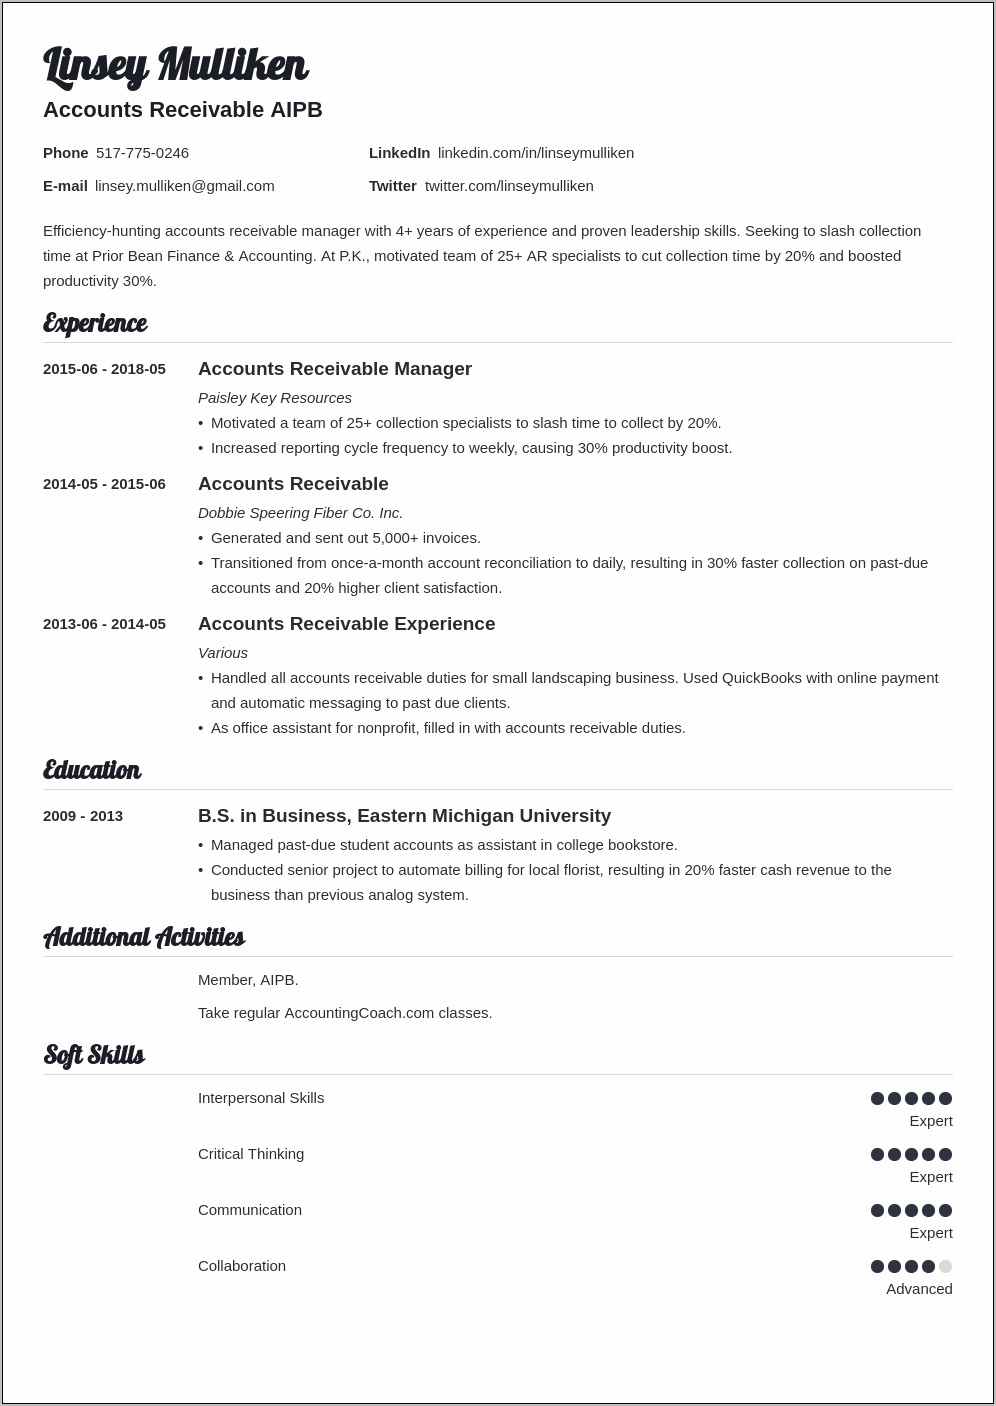 Resume Objective For Accounts Receivable Manager